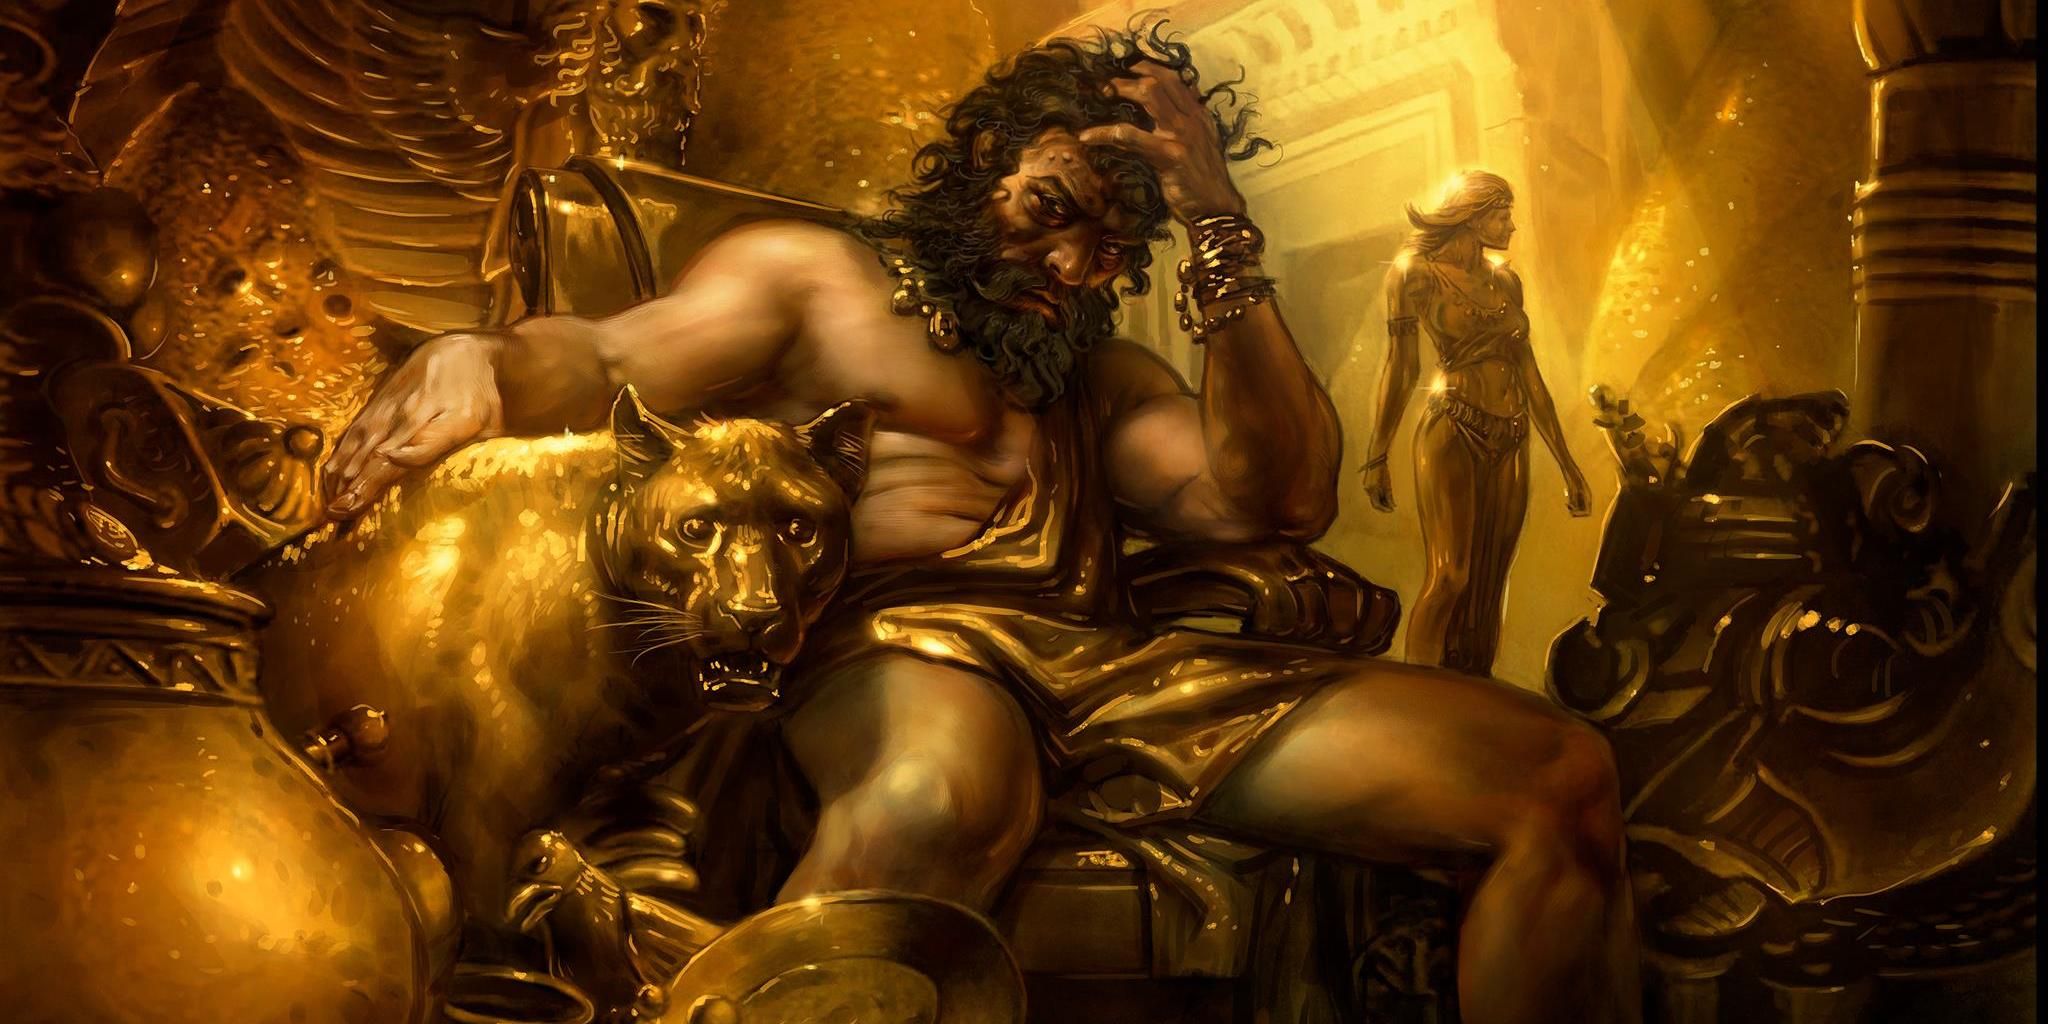 A bedraggled man with a ragged black beard sitting amidst a room filled with gold